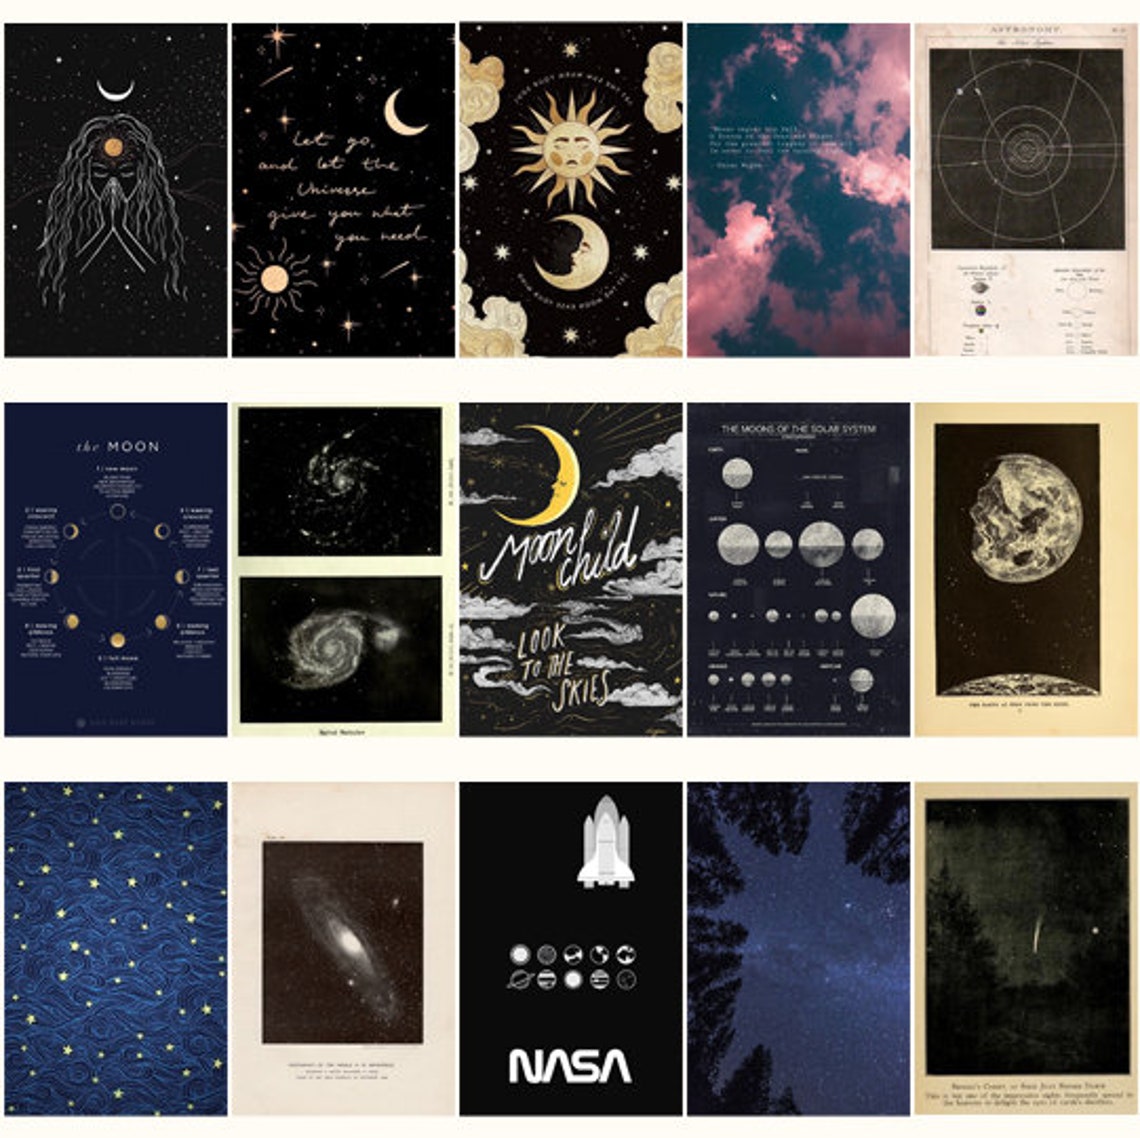 PRINTED Moonlight Aesthetic Wall Collage Kit Astronomy - Etsy